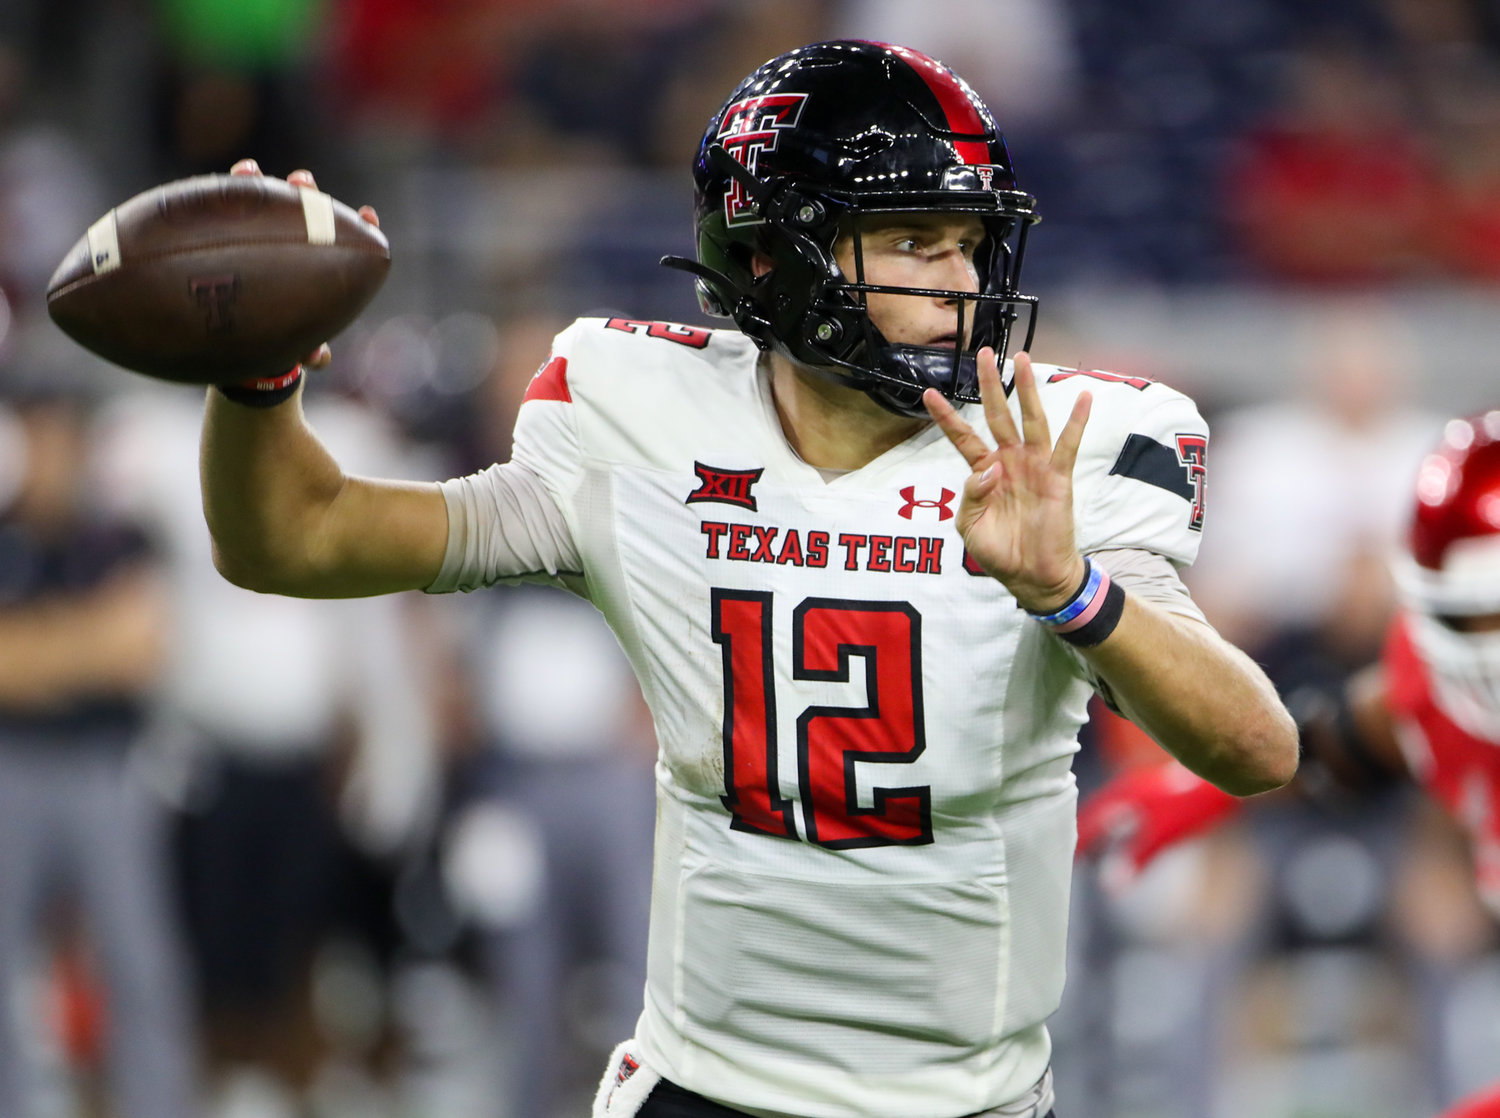 Texas Tech Red Raiders quarterback Tyler Shough (12) looks to pass during an NCAA football game between Houston and Texas Tech on September 4, 2021 in Houston, Texas.